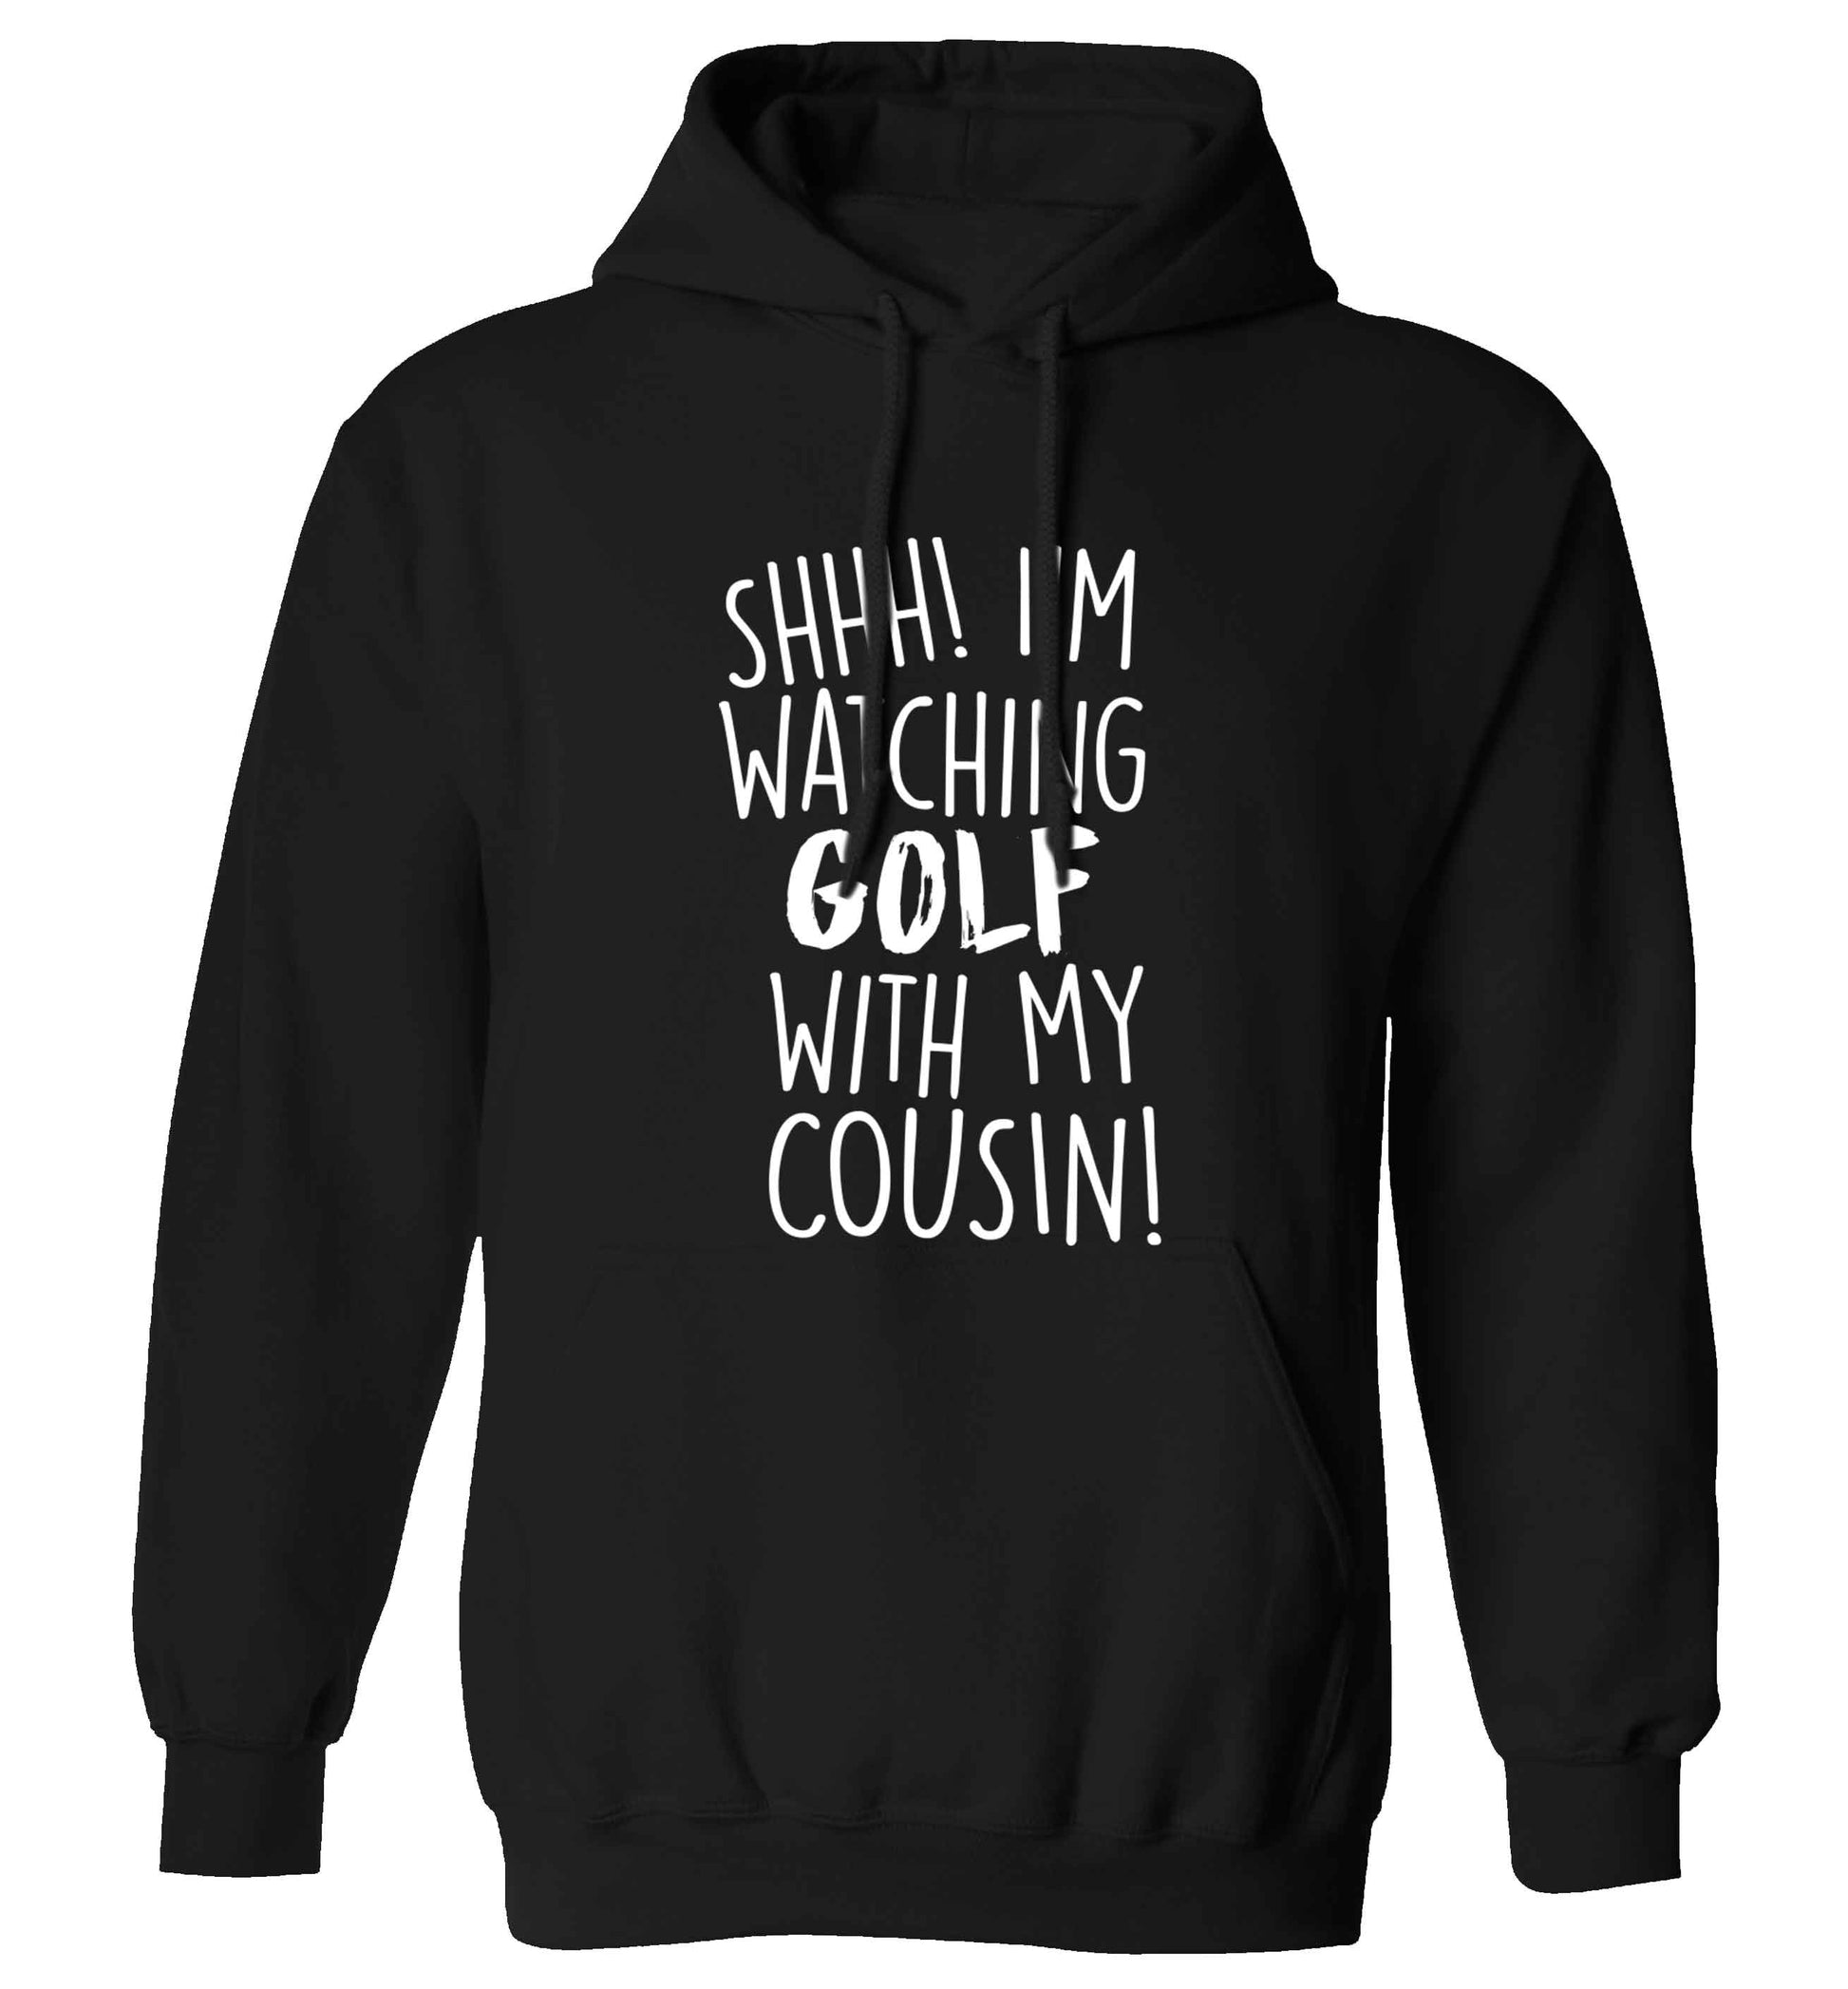 Shh I'm watching golf with my cousin adults unisex black hoodie 2XL